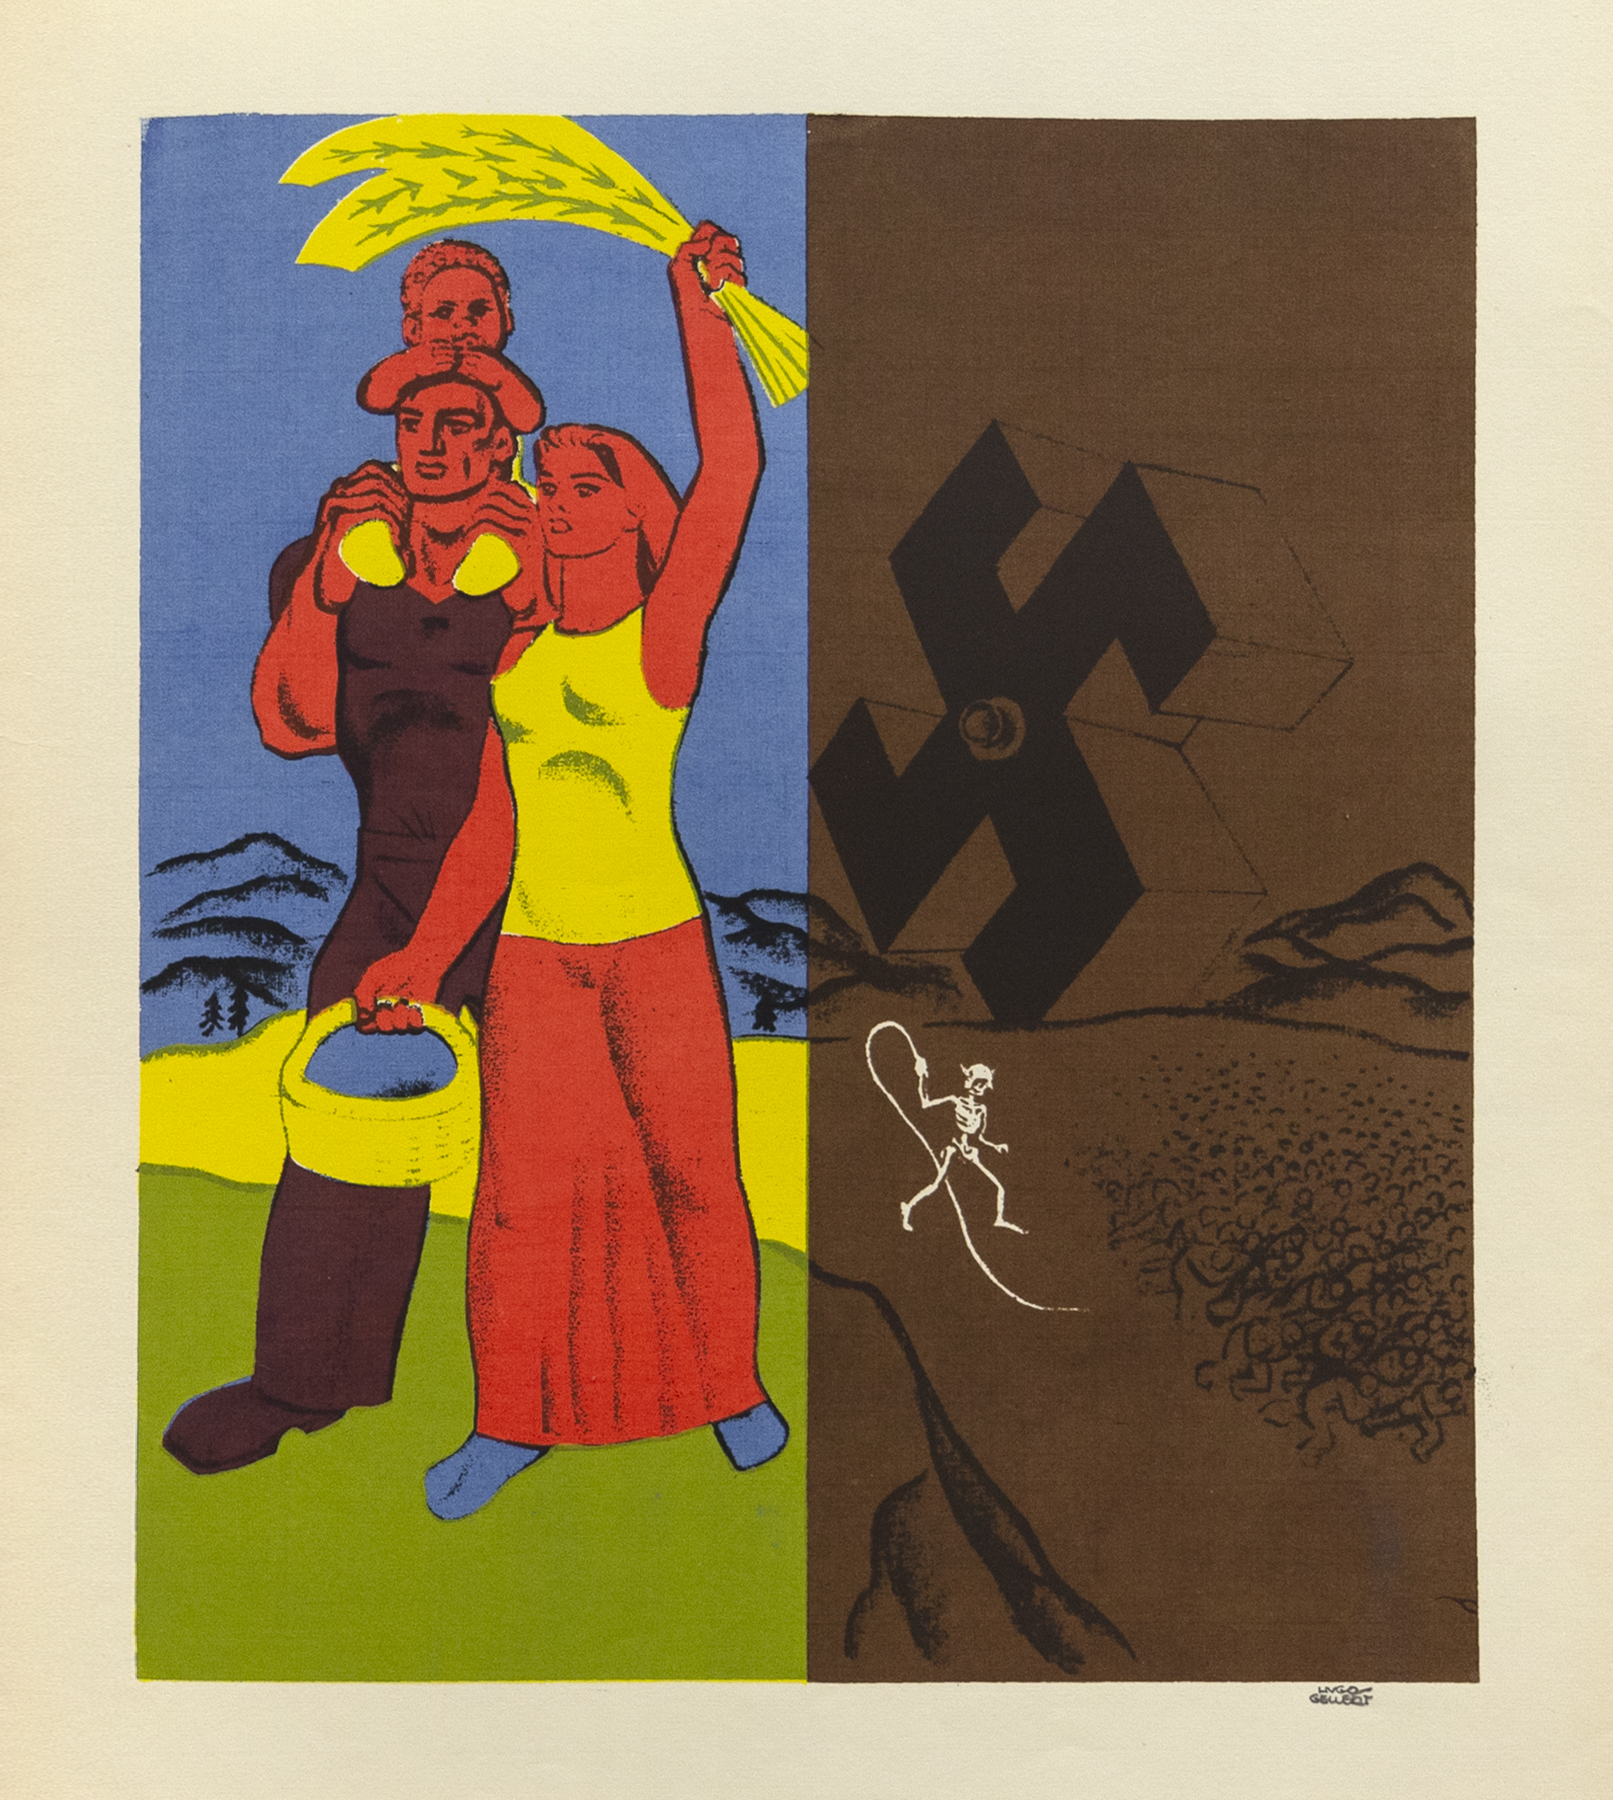 Free World or Slave World, 1943, Silkscreen, 15 x 12 inches (38.1 x 30.5 cm), Edition of 54